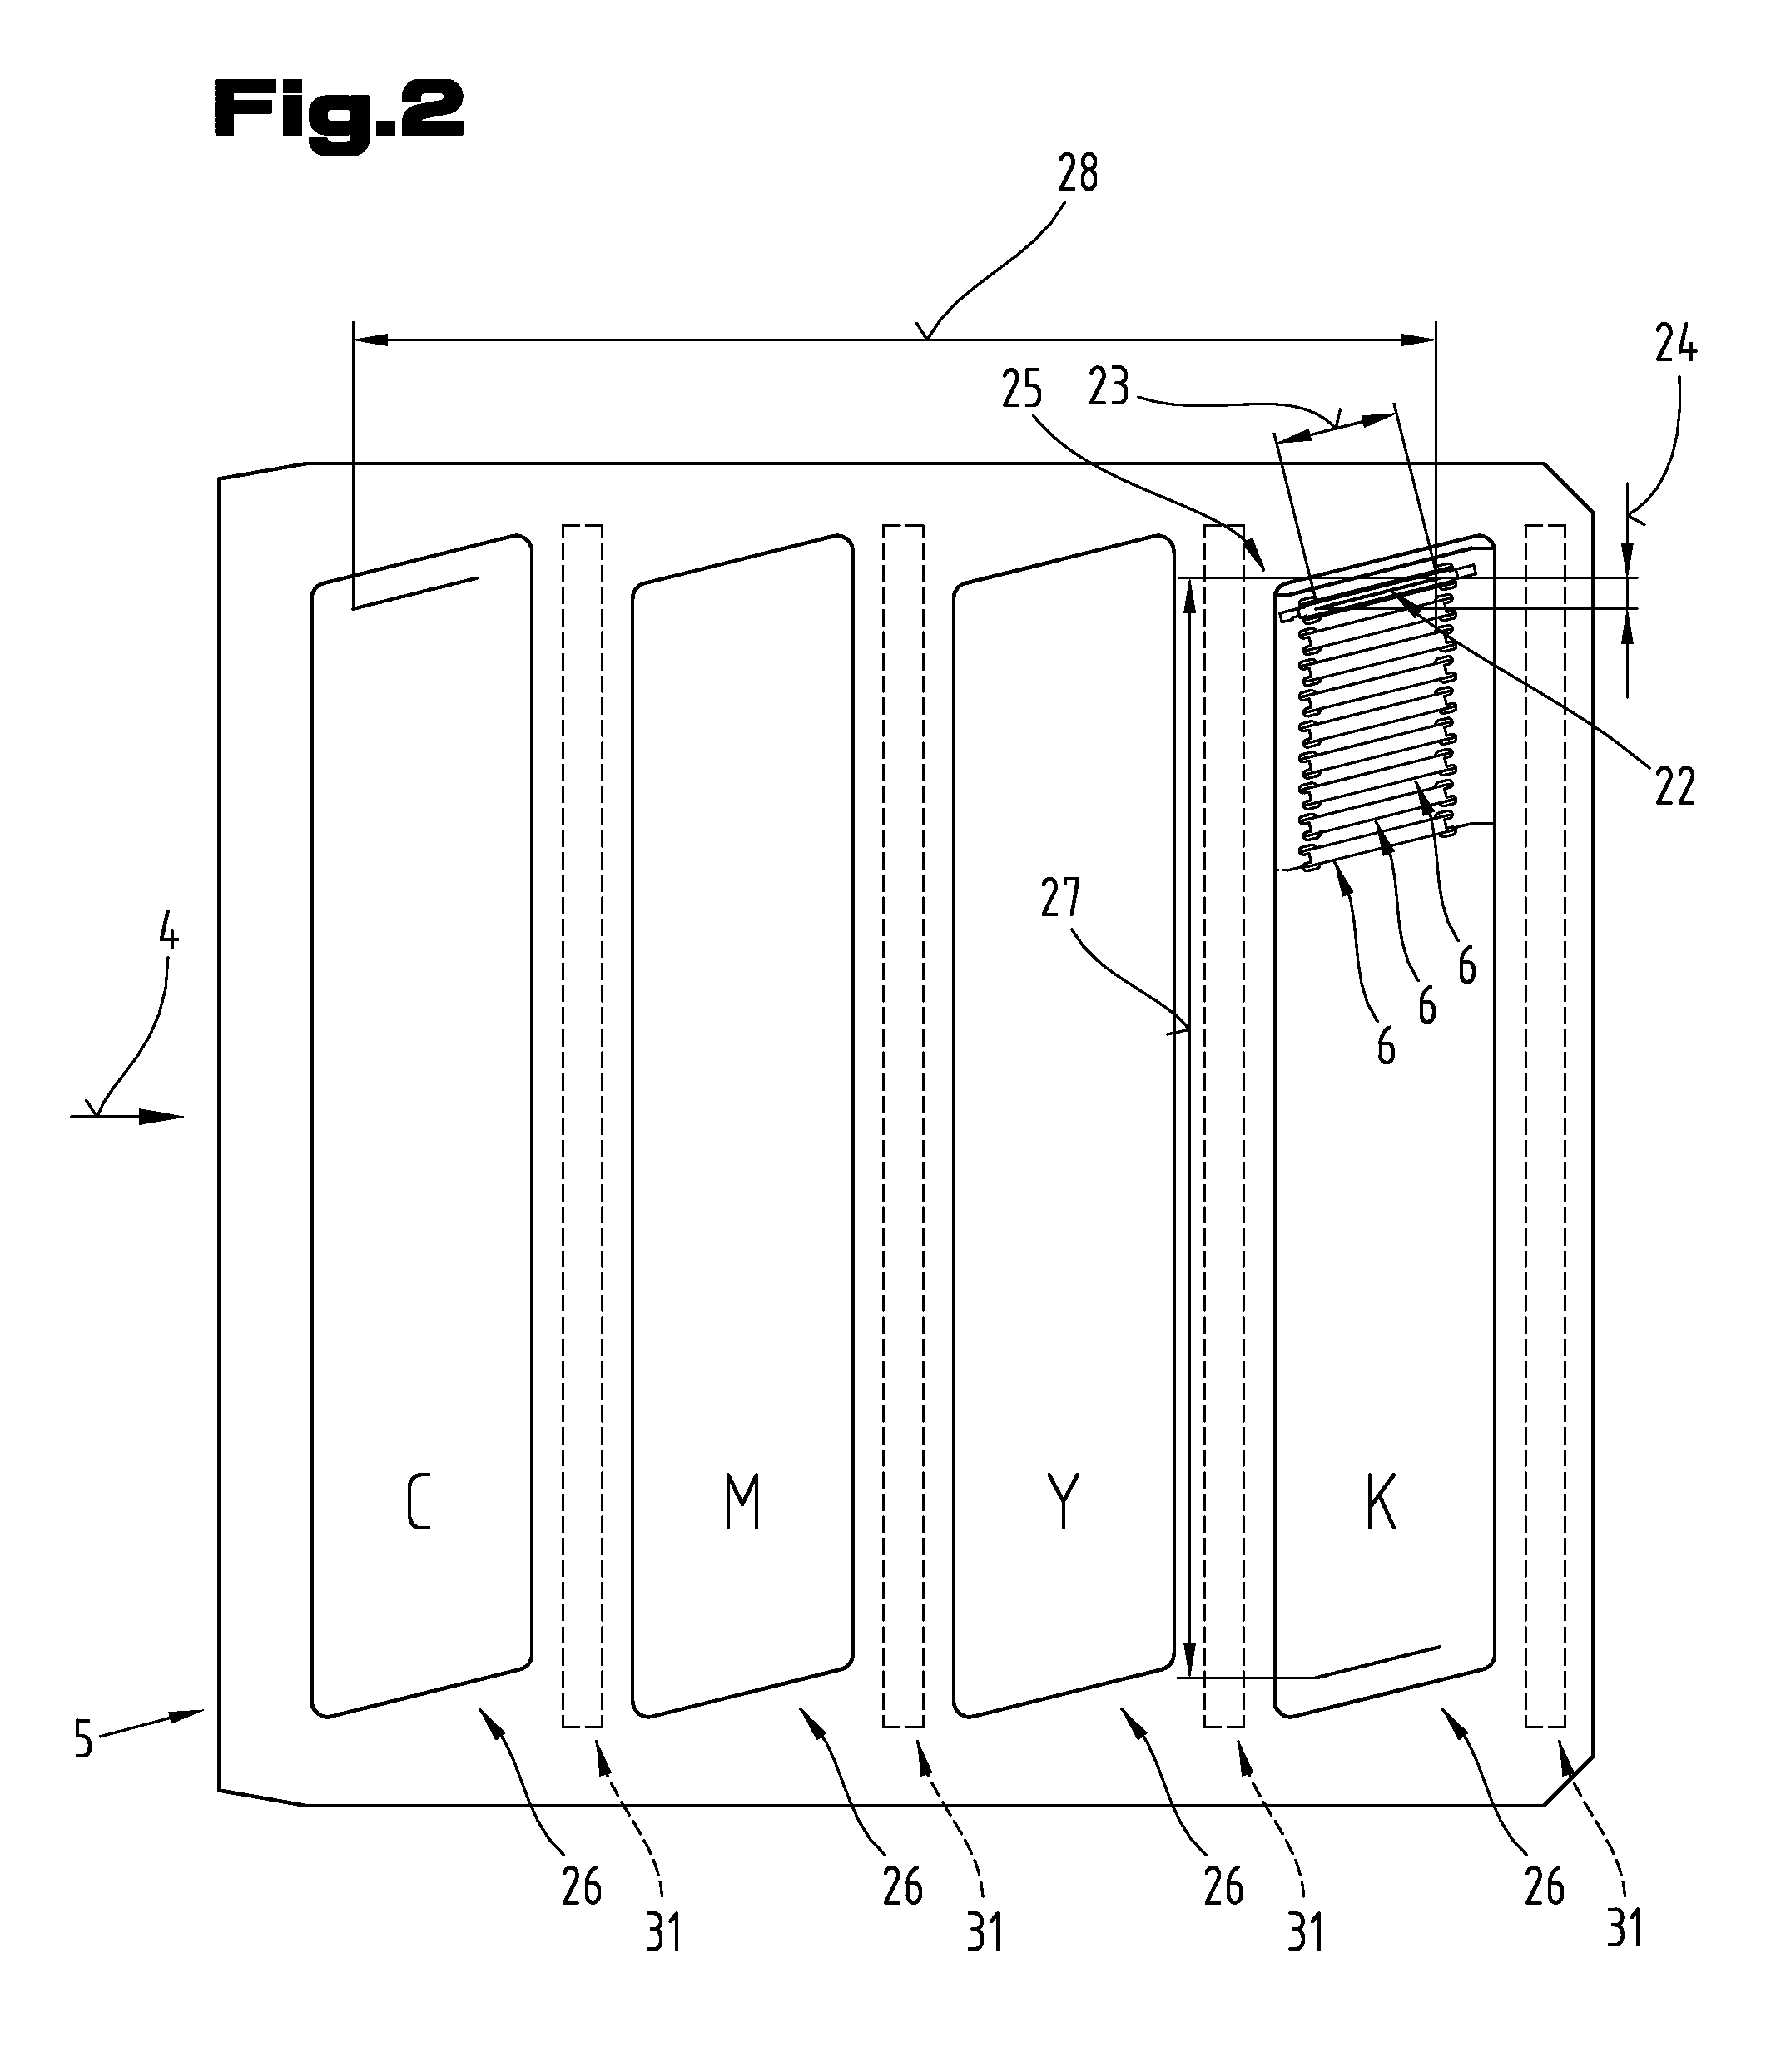 Method for producing a multicolored surface on glass